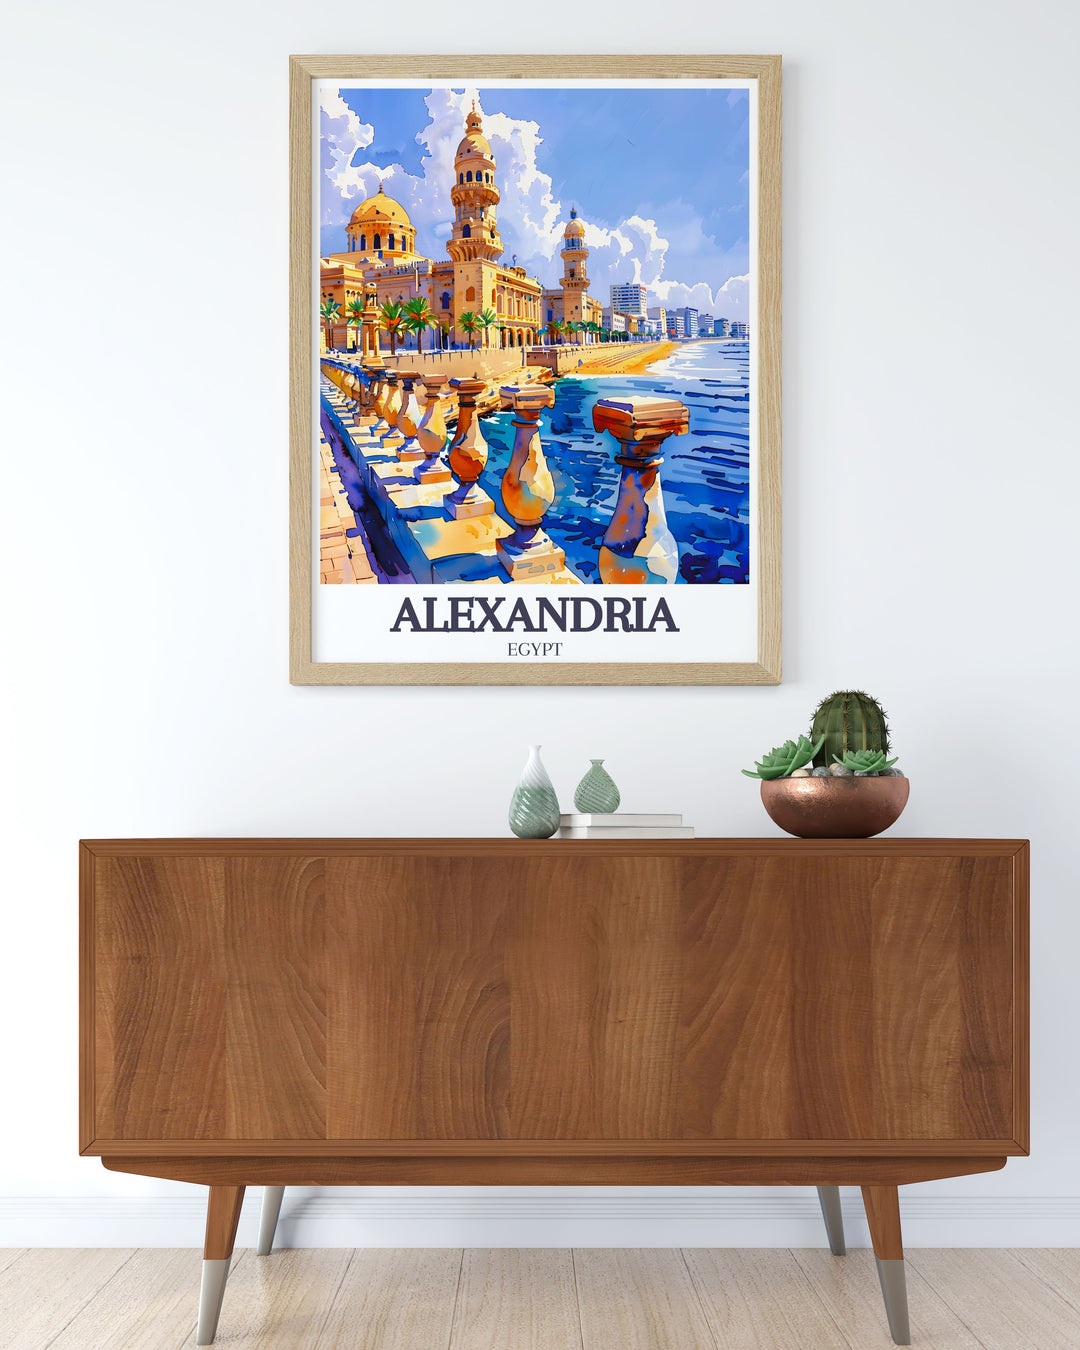 This Alexandria Egypt map art print highlights Stanley Beach and Corniche Promenade Cathedral in a vibrant and colorful design. Ideal for home or office decor, this print brings the citys rich heritage and stunning architecture to your walls.